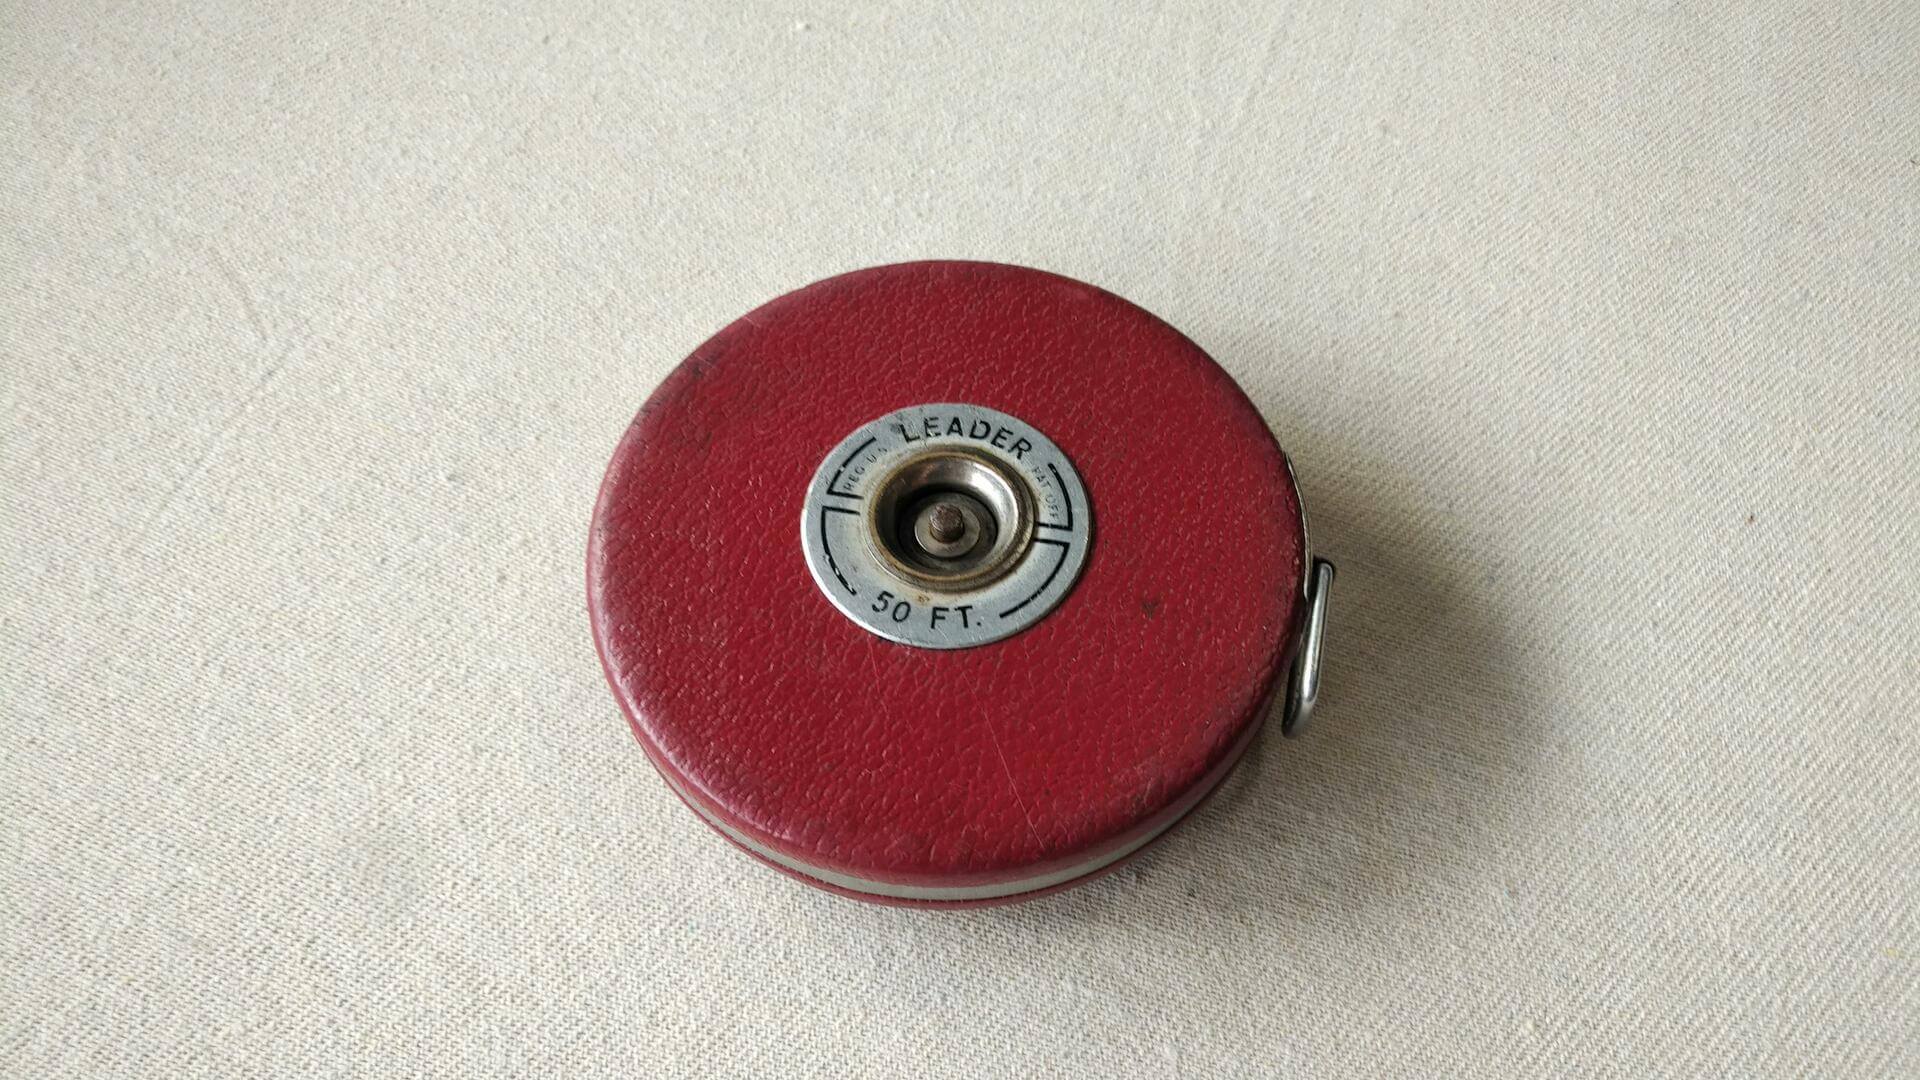 Nice vintage 50′ chrome clad steel tape measure by Lufkin Rule Co. from Saginaw, MI in red leather case. Antique made in both USA collectible marking and measuring tool. Note previous owner engraved name and address on the tape rim.